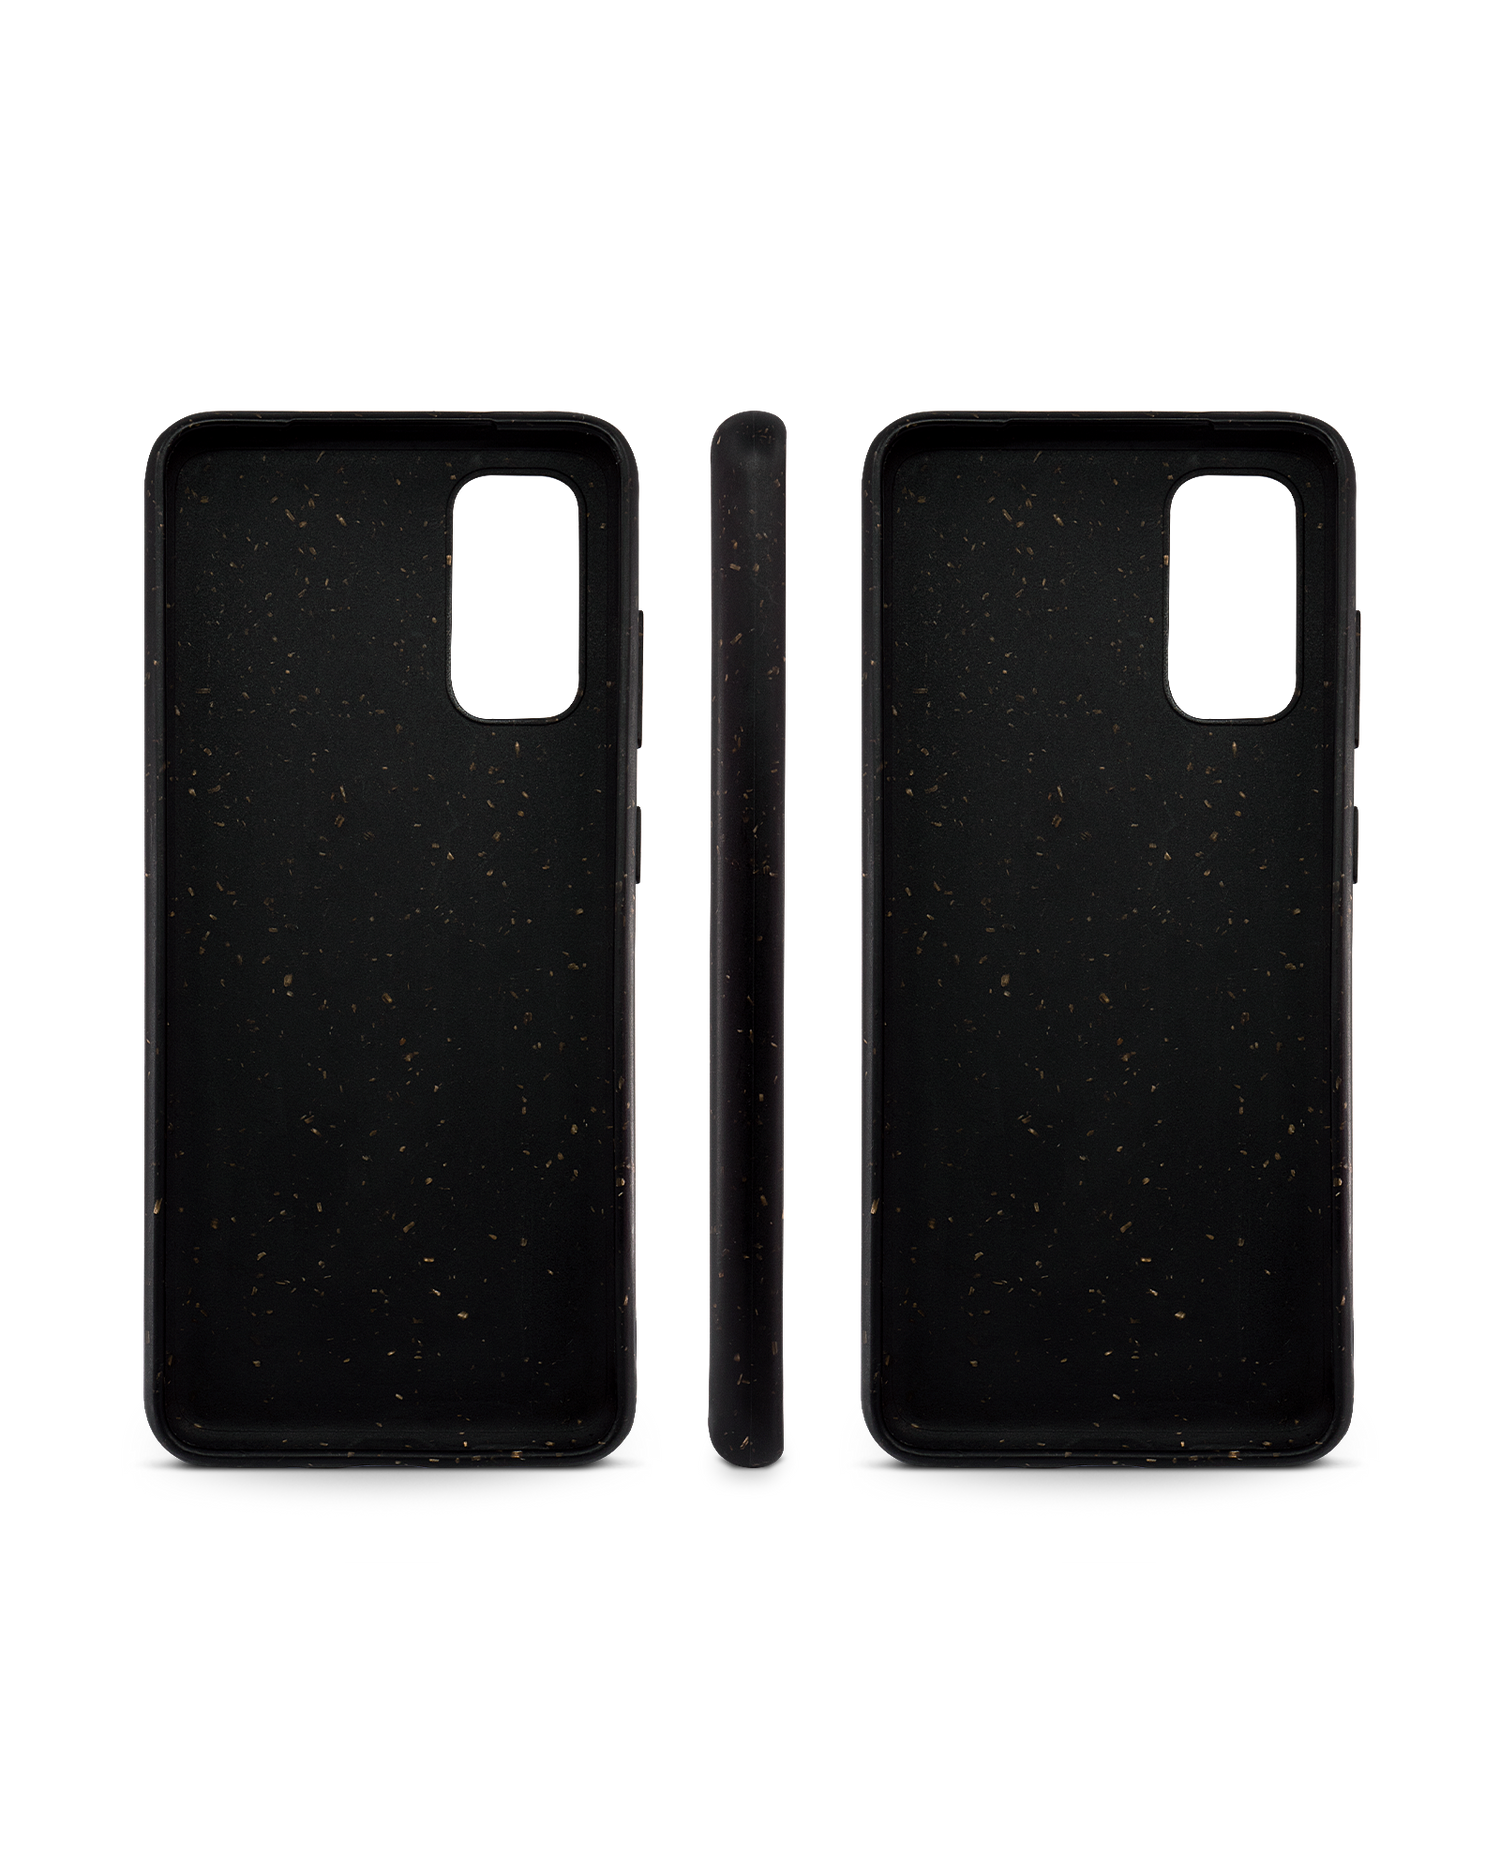 Black Eco-Friendly Phone Case for Samsung Galaxy S20: Side Views